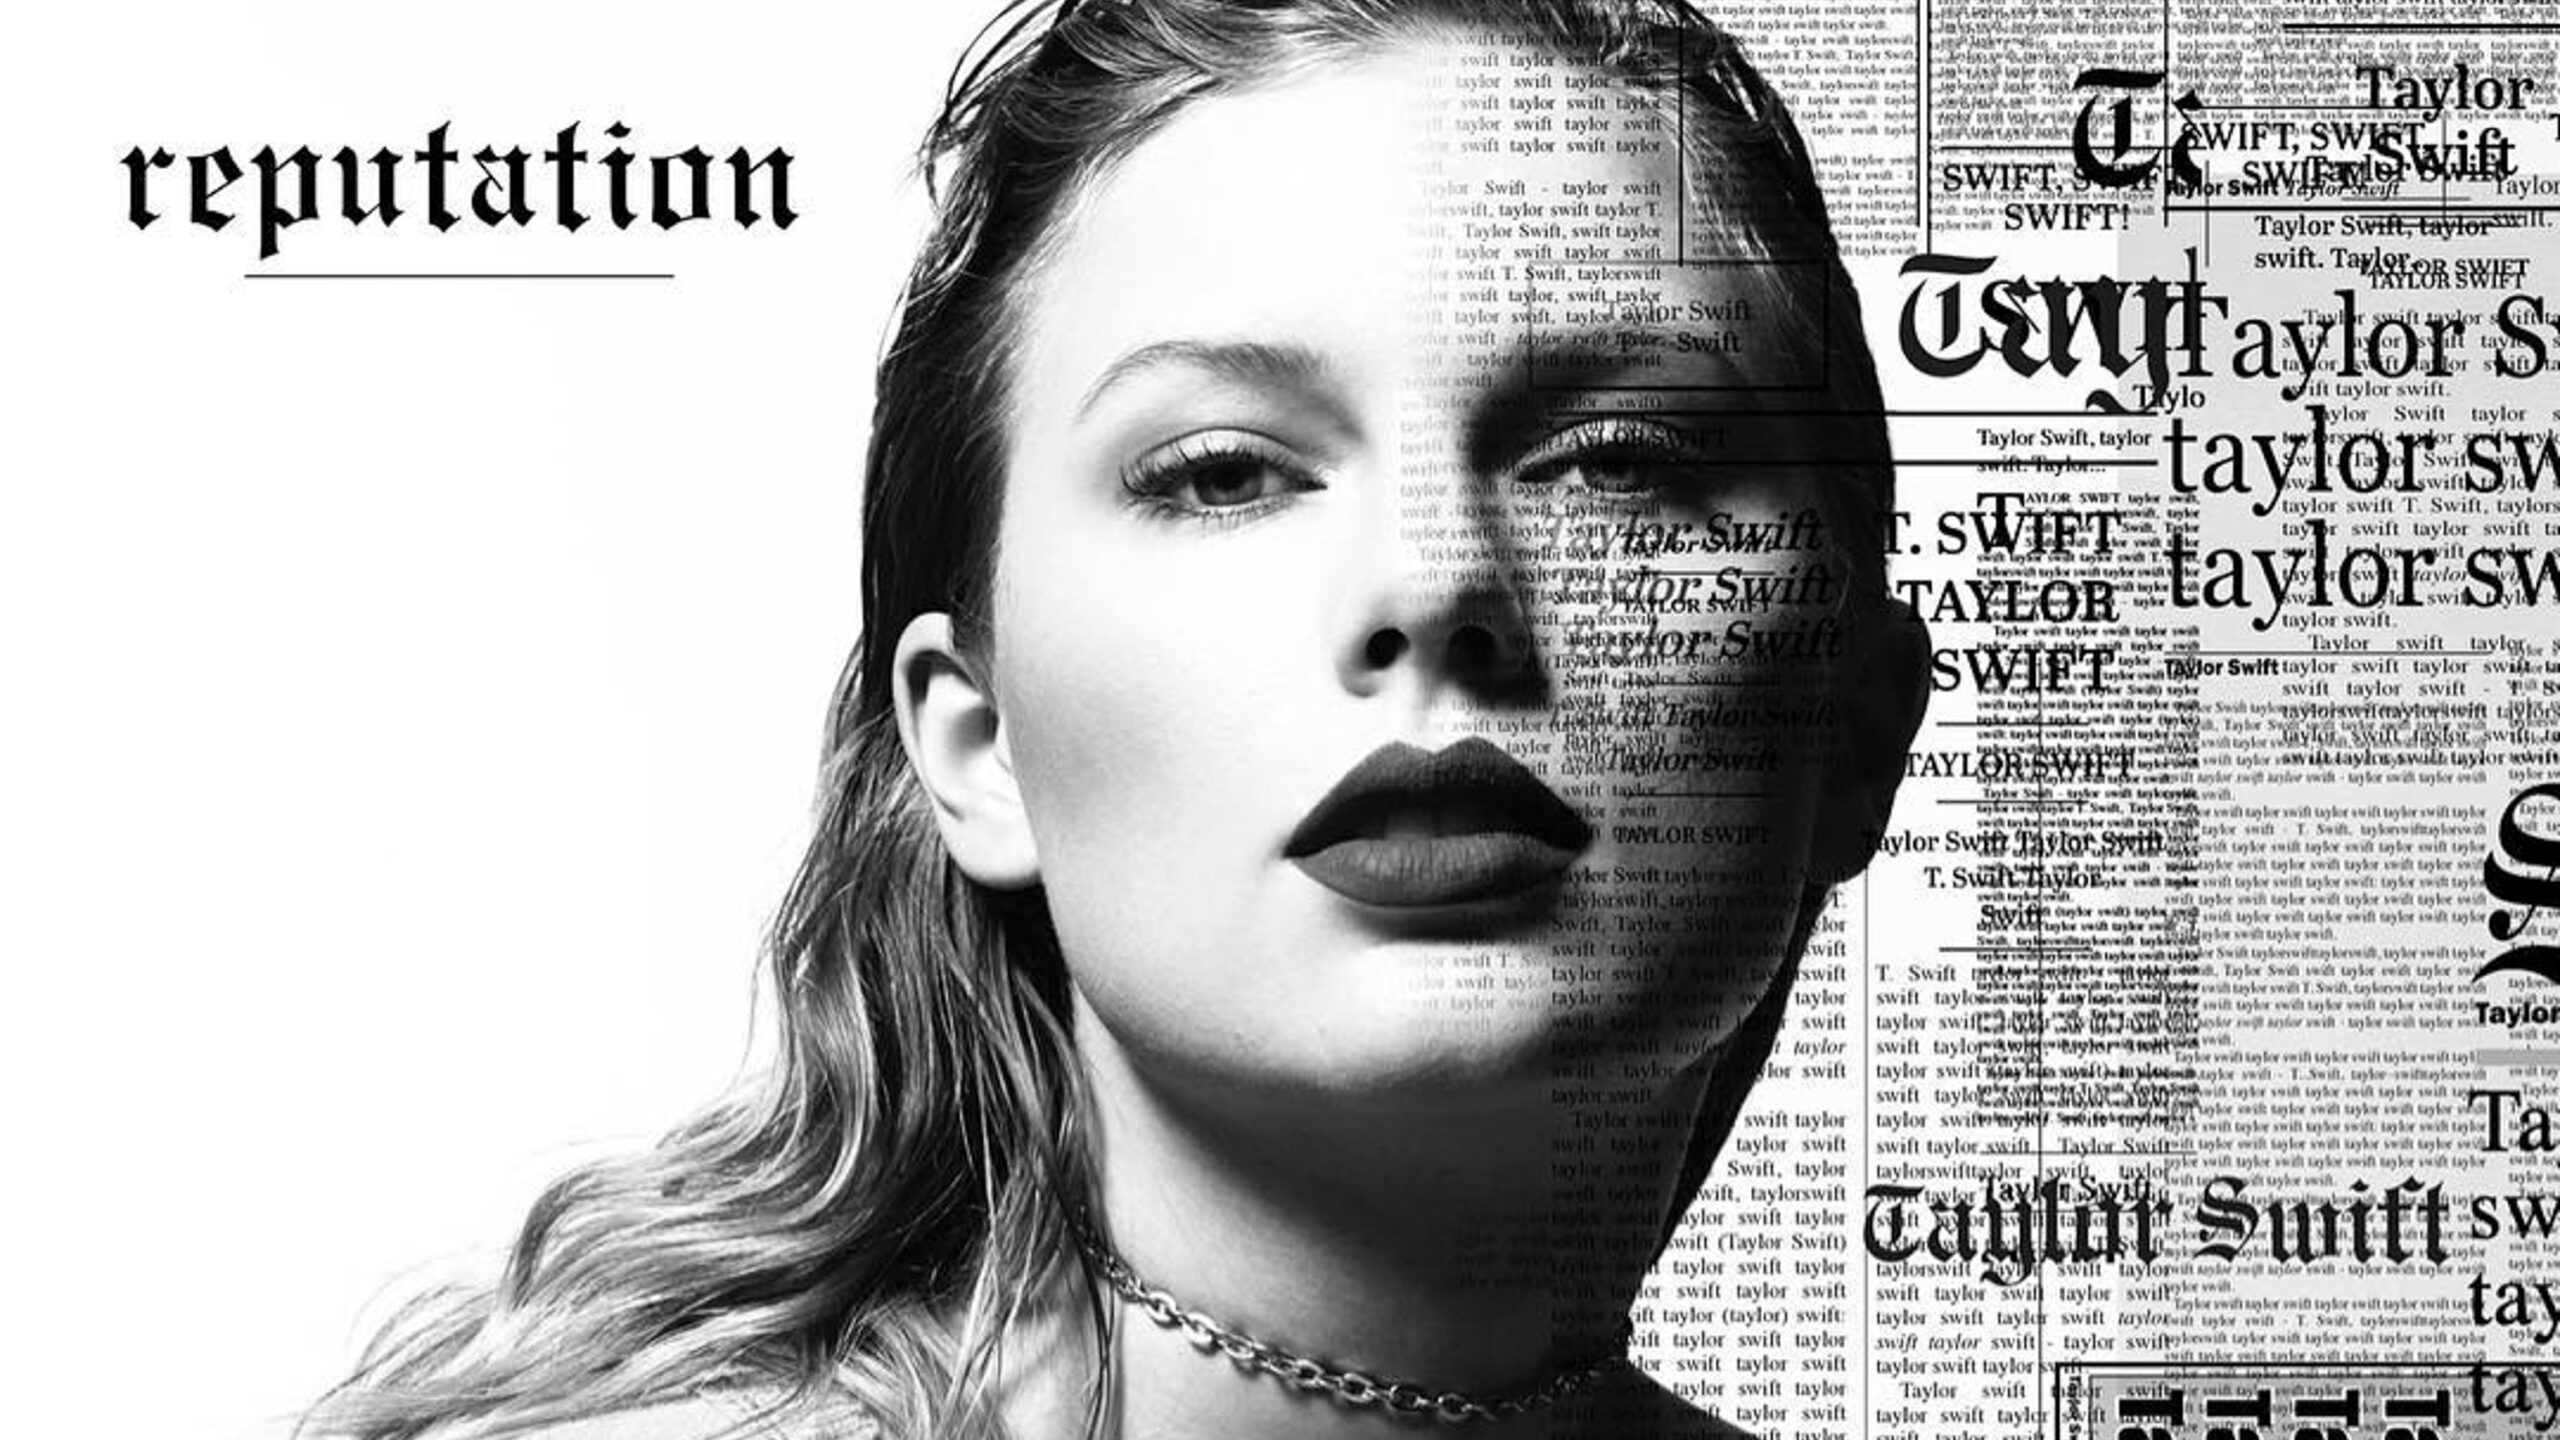 Taylor Swift to release new album in November 2017